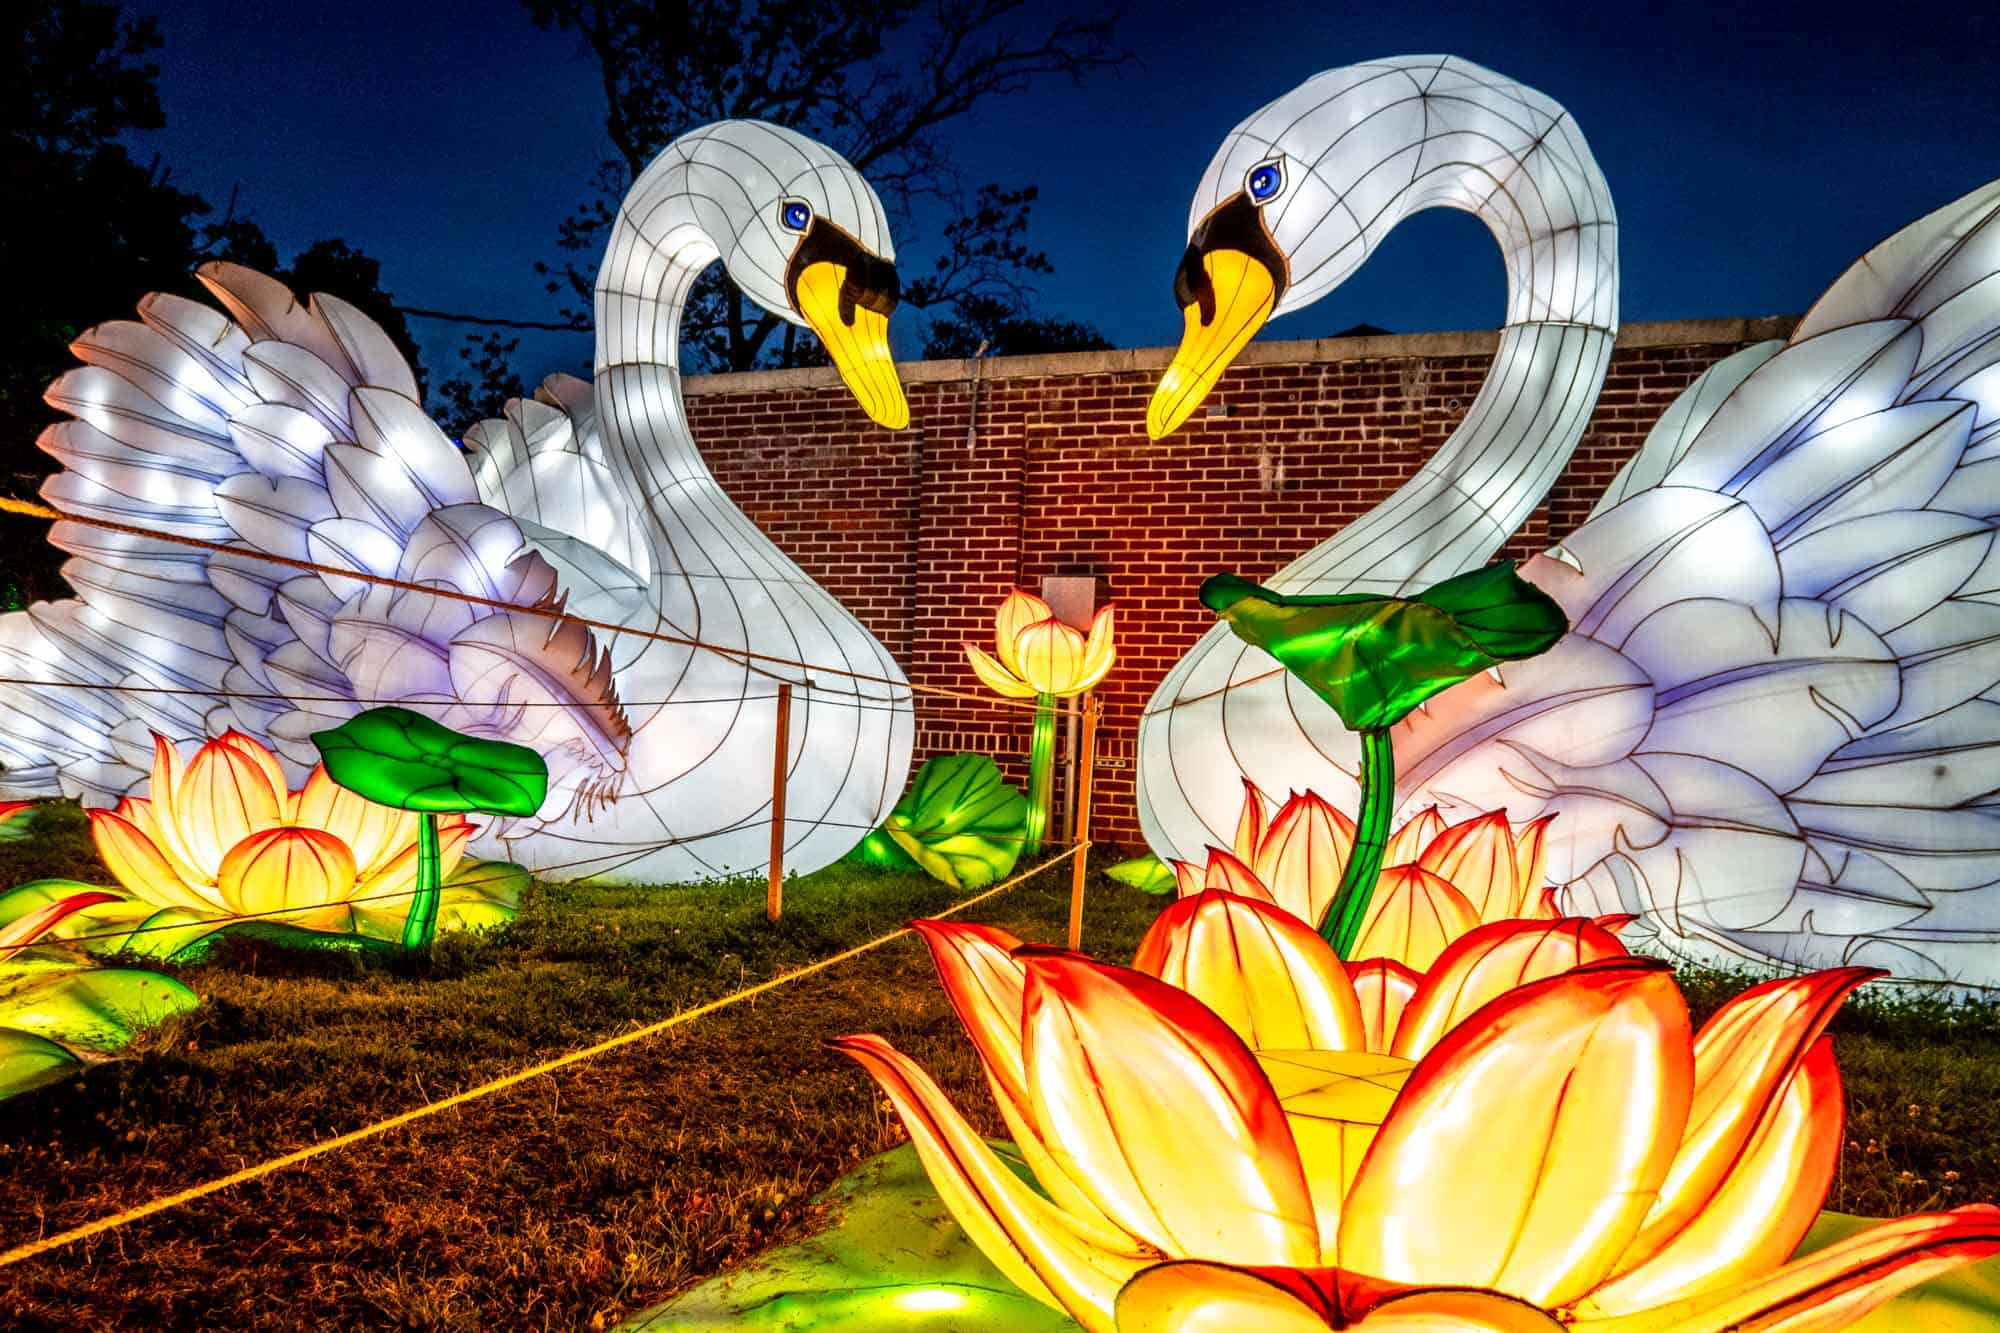 Two swan lanterns surrounded by flower lanterns lit up at night